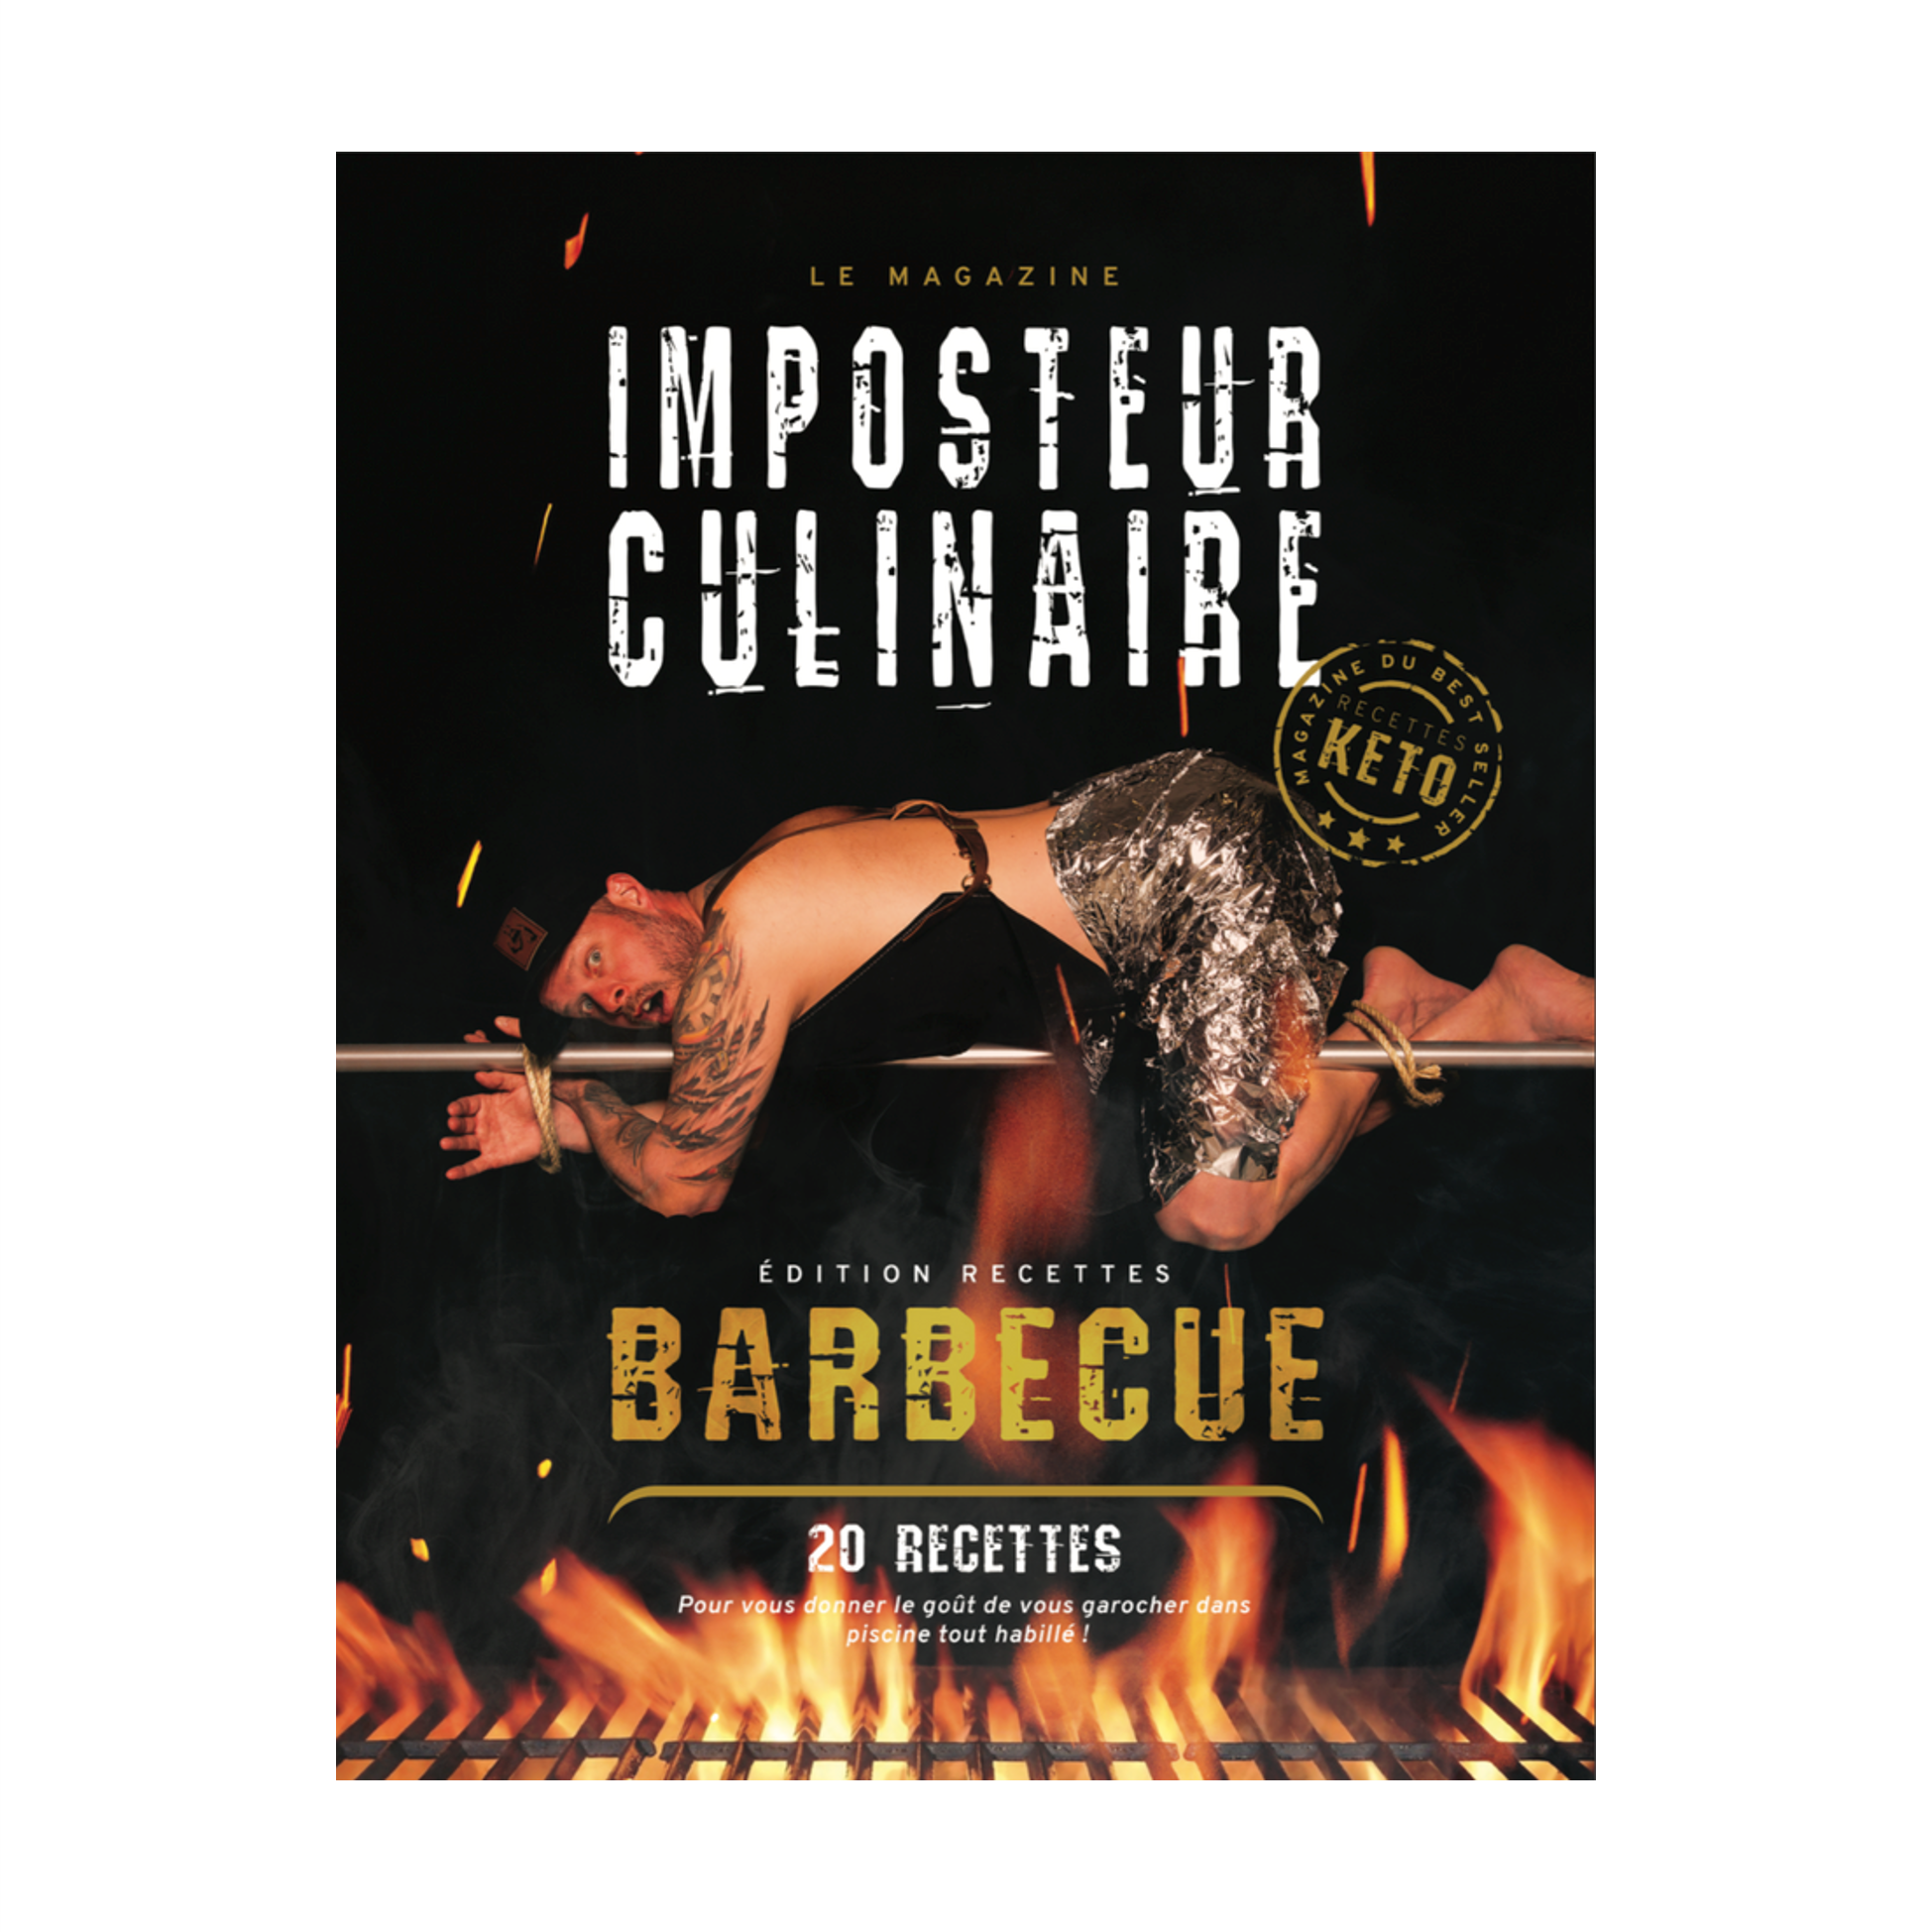 Imposteur Culinaire Barbecue